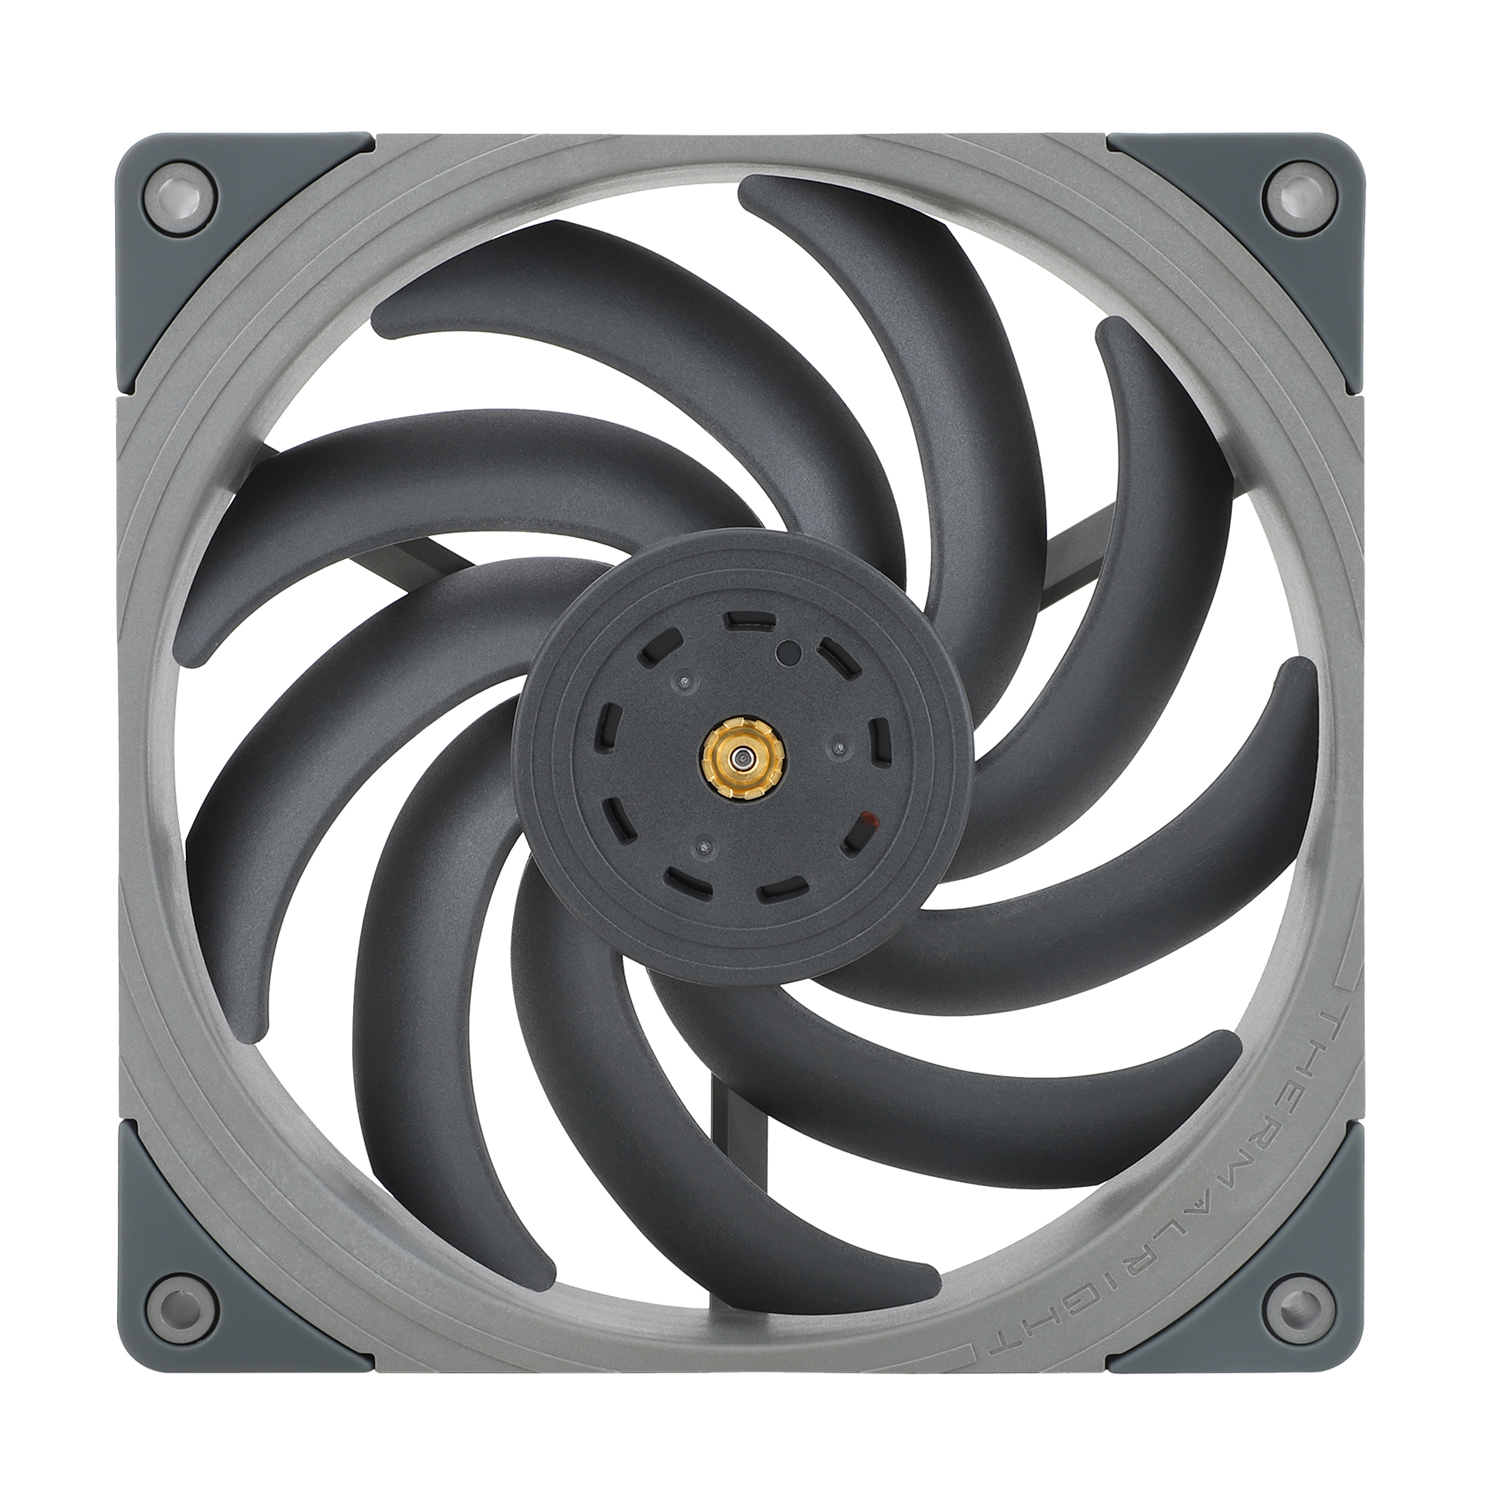 Test Ventilateur : Thermalright TL-C12 PRO-G - Pause Hardware